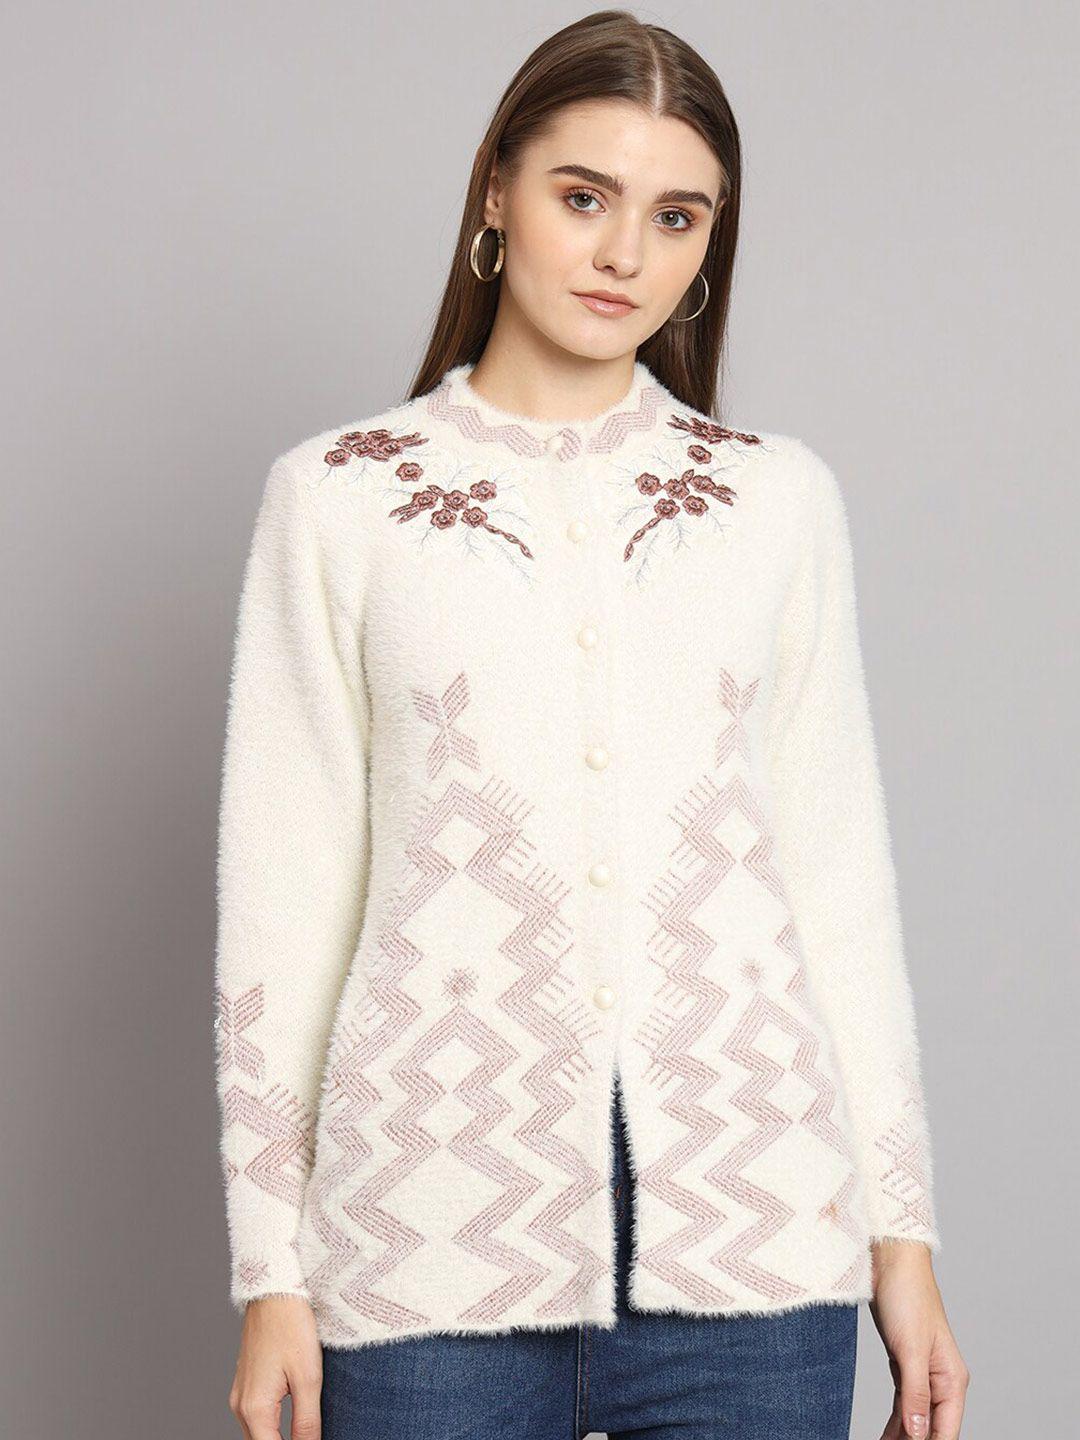 ewools floral embroidered pure woollen cardigan